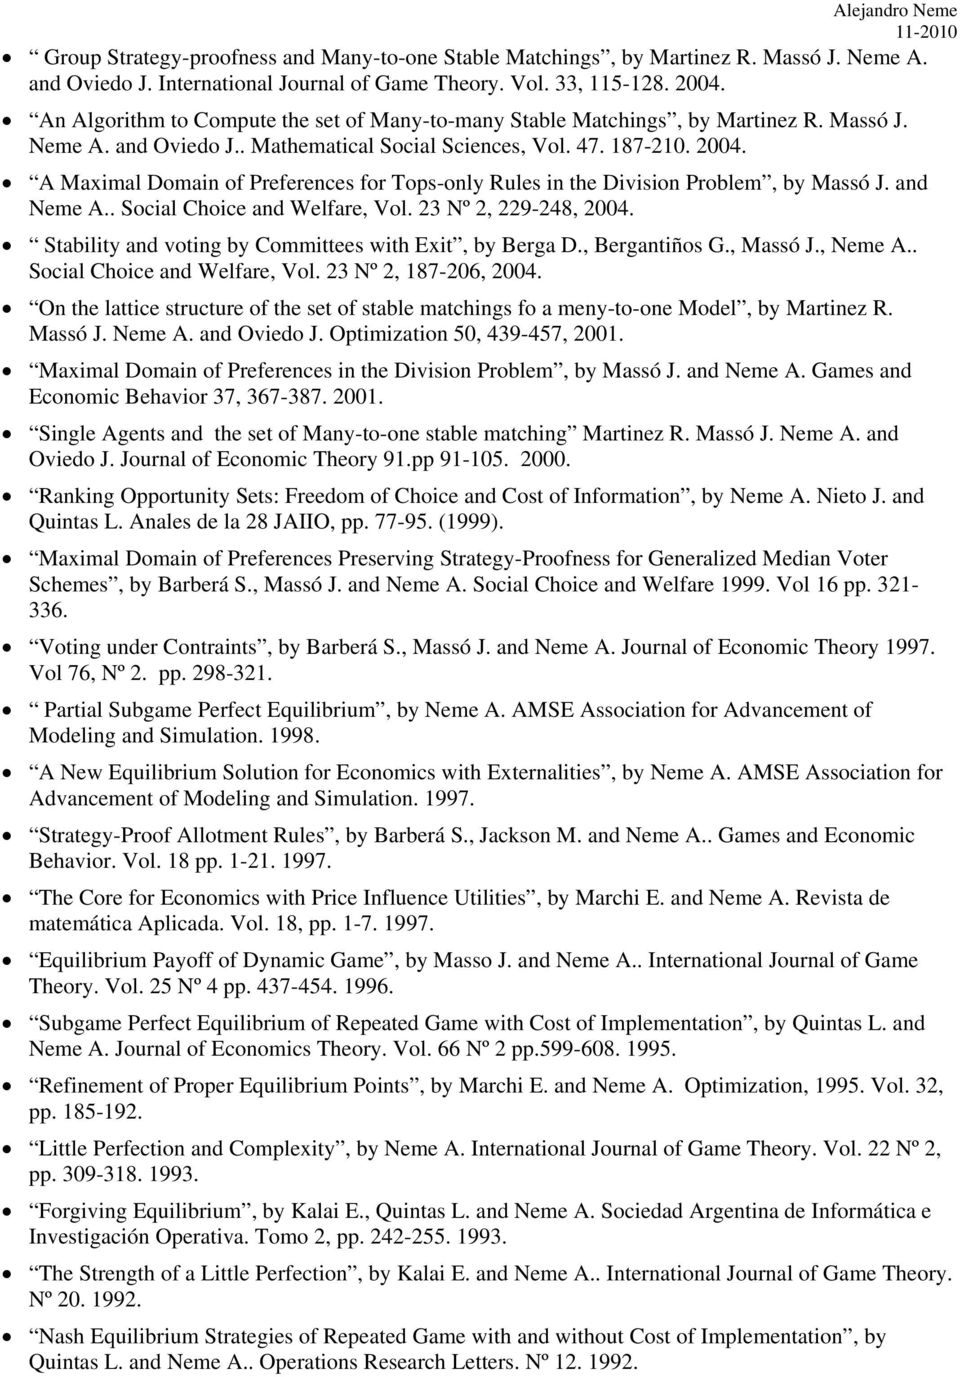 A Maximal Domain of Preferences for Tops-only Rules in the Division Problem, by Massó J. and Neme A.. Social Choice and Welfare, Vol. 23 Nº 2, 229-248, 2004.